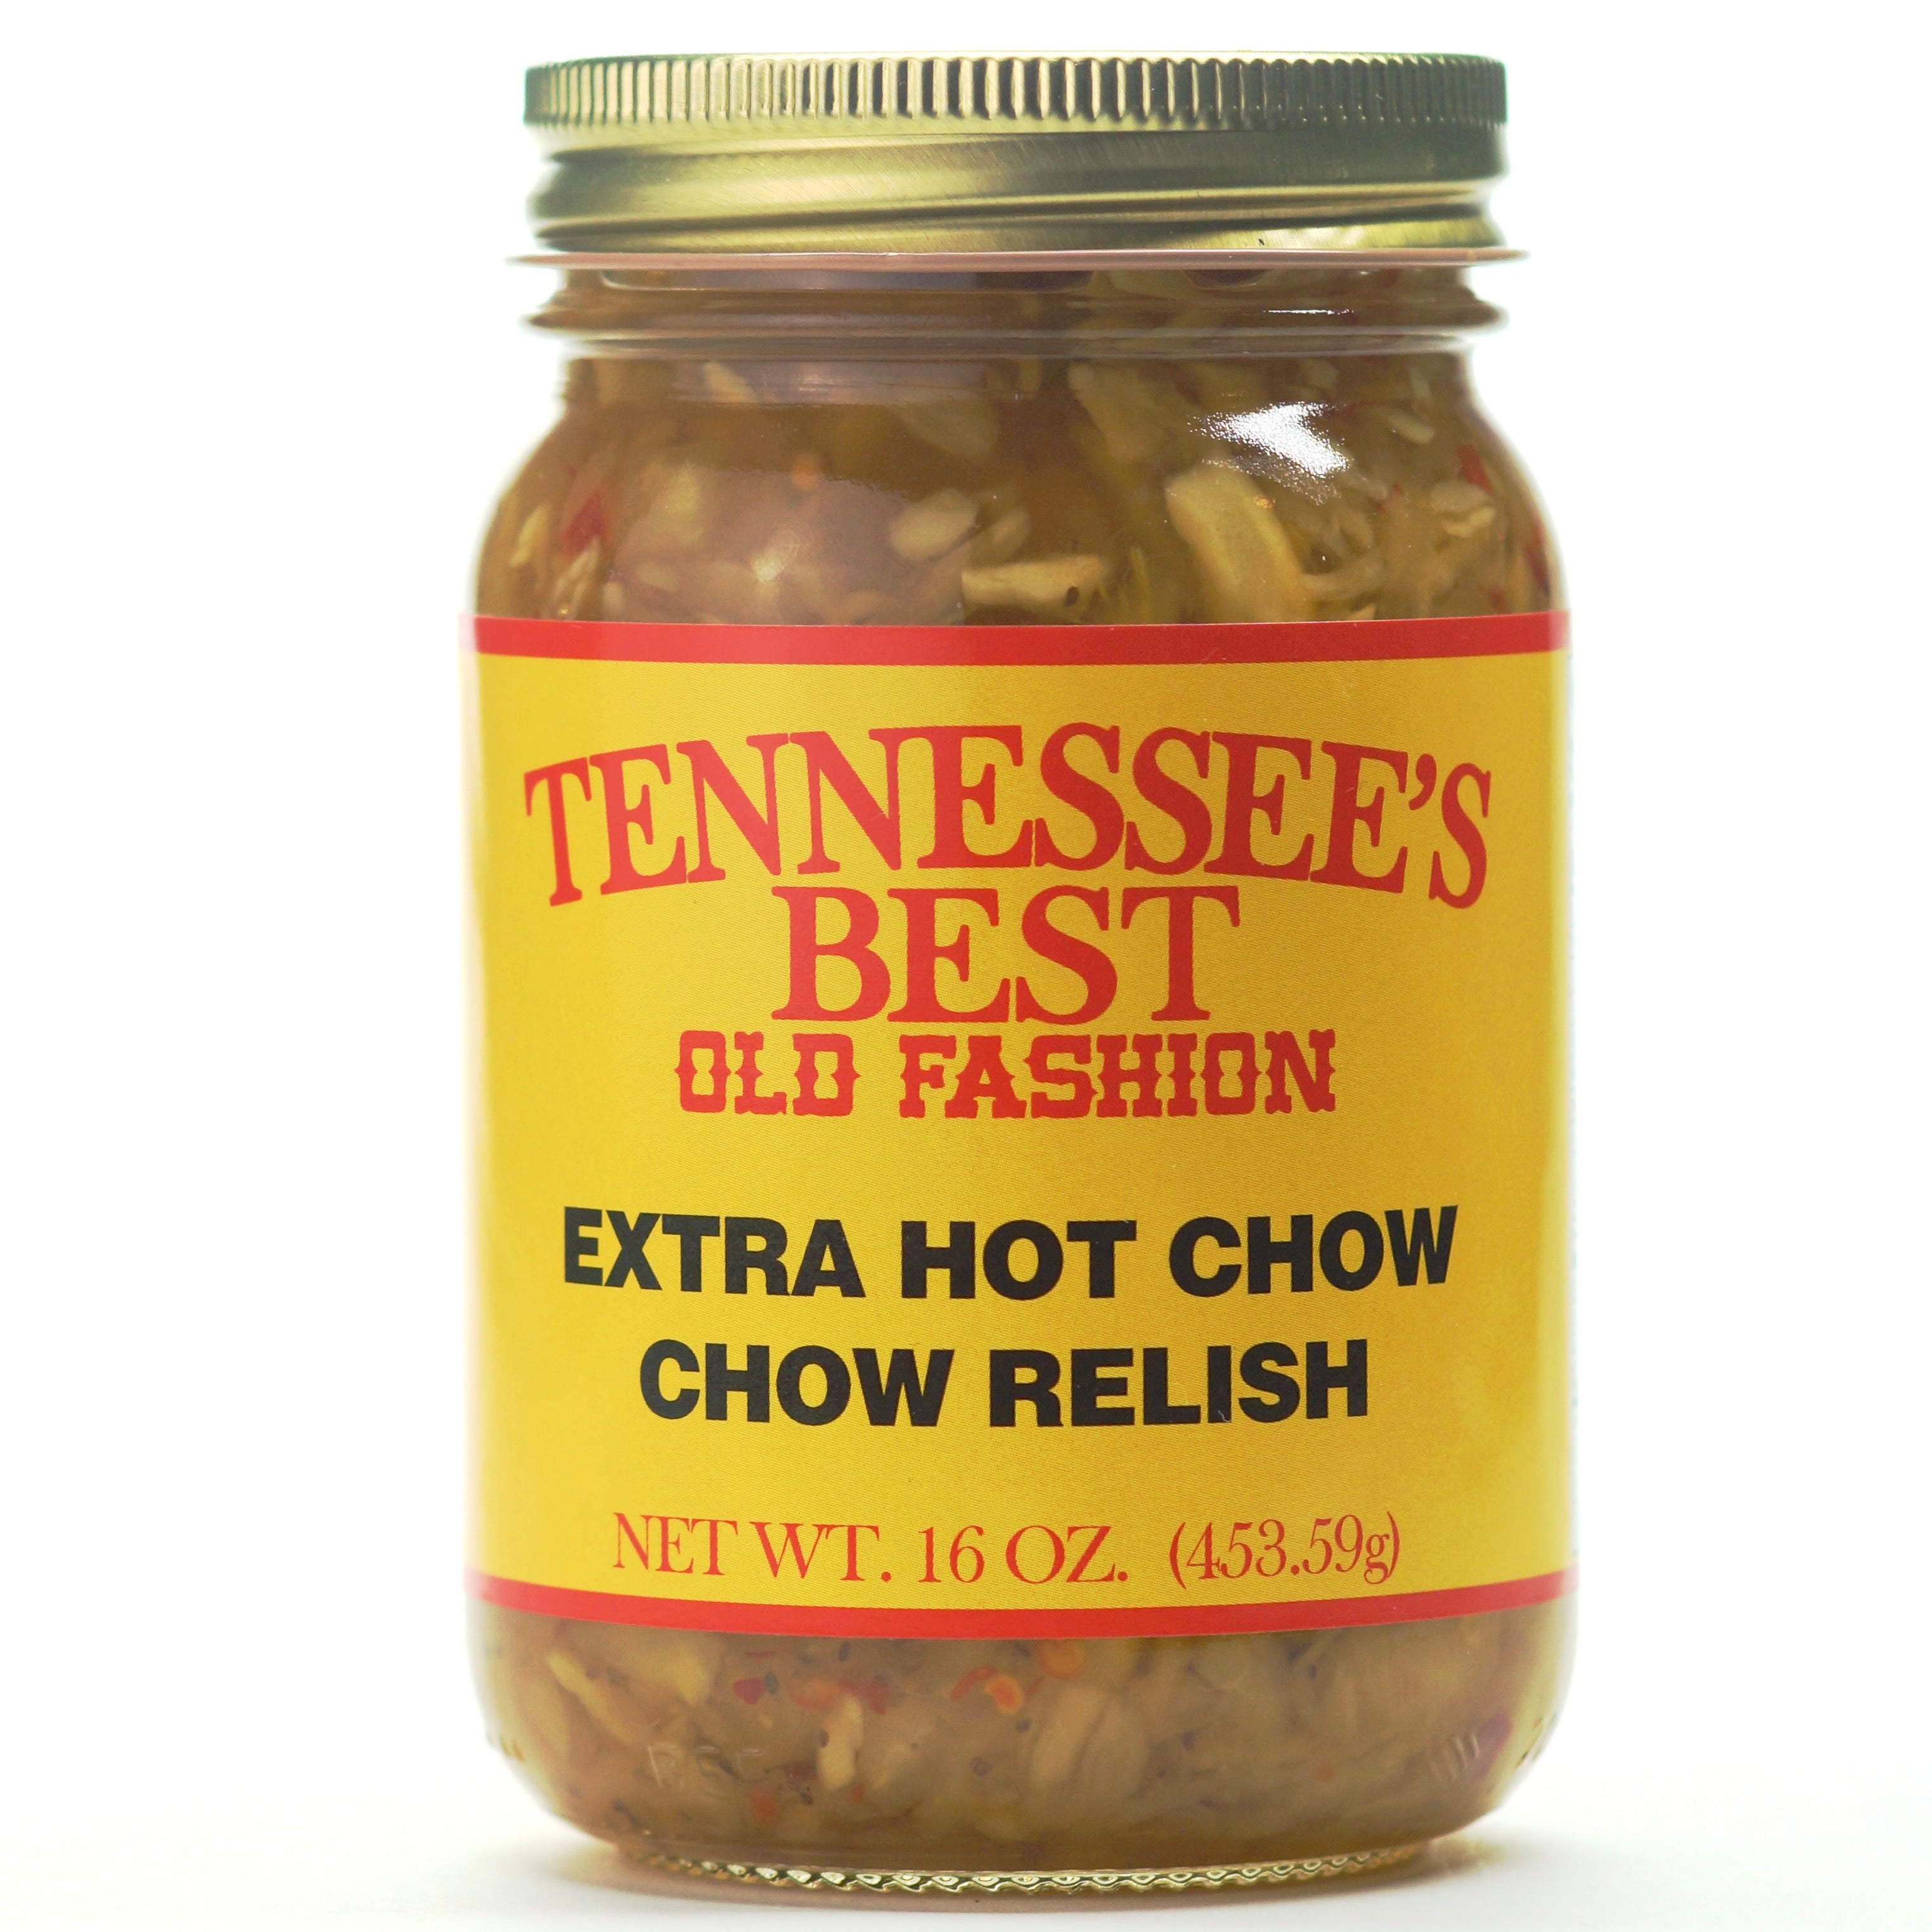 Tennessee's Best Old Fashion Style Chow Chow Relish